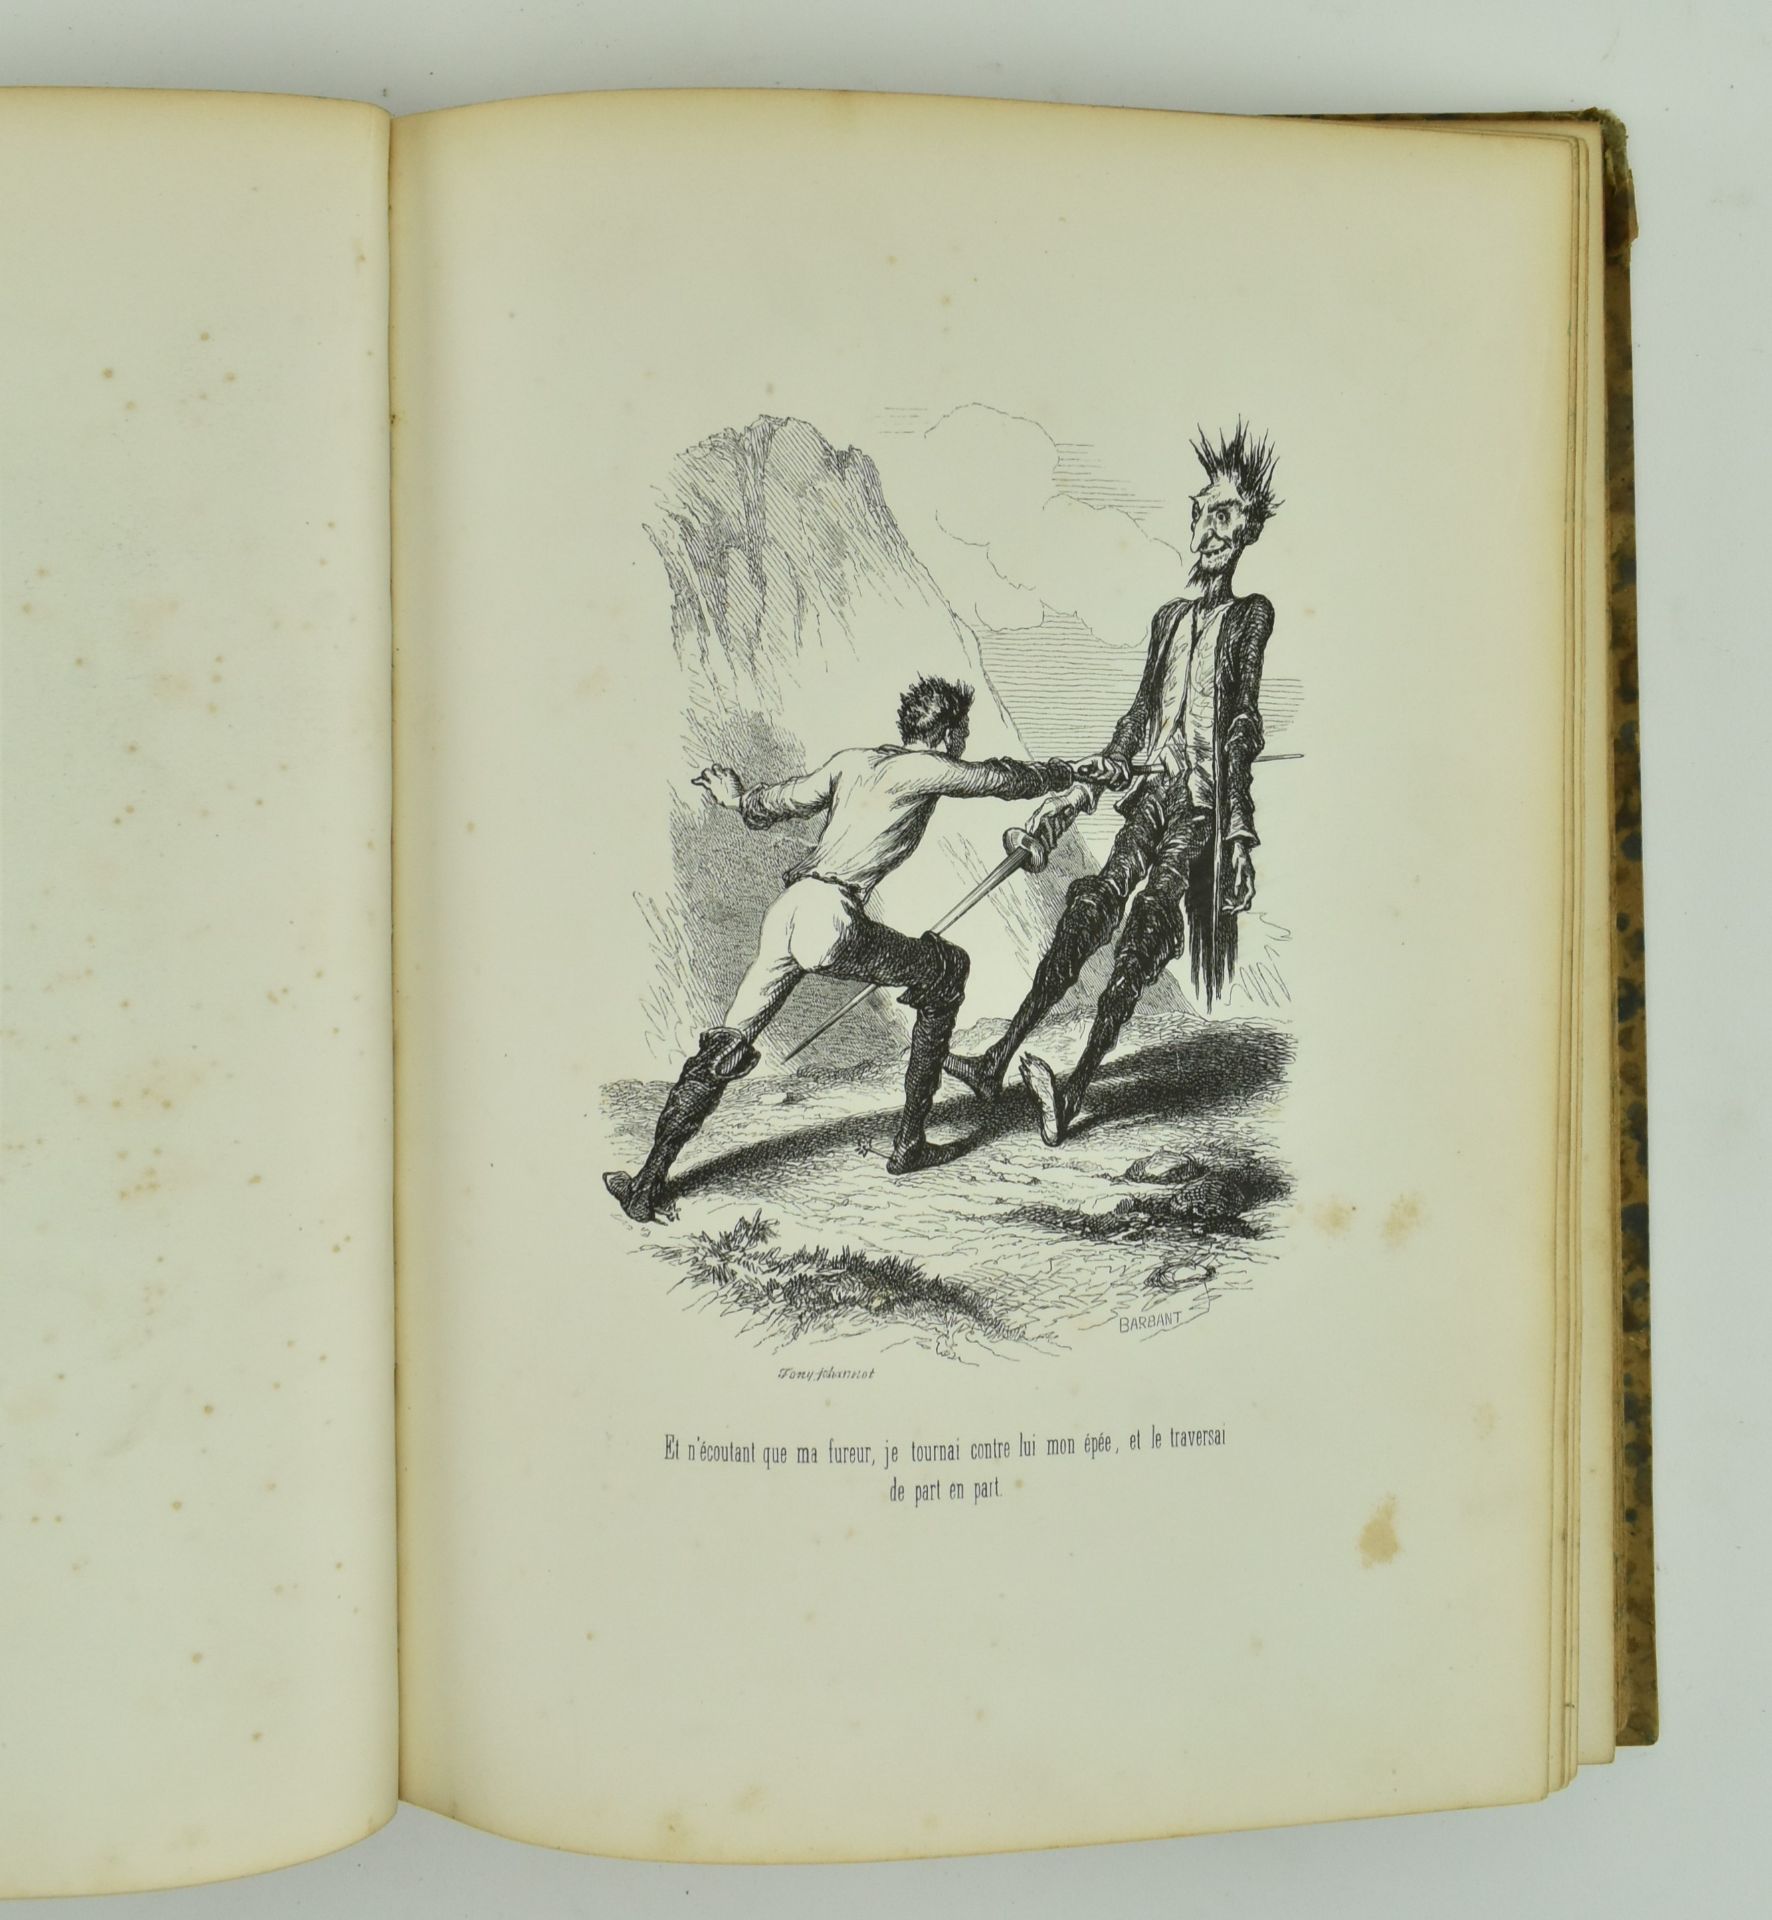 JOHANNOT, TONY. 1843 VOYAGE OU IL VOUS PLAIRA FIRST EDITION - Image 5 of 6